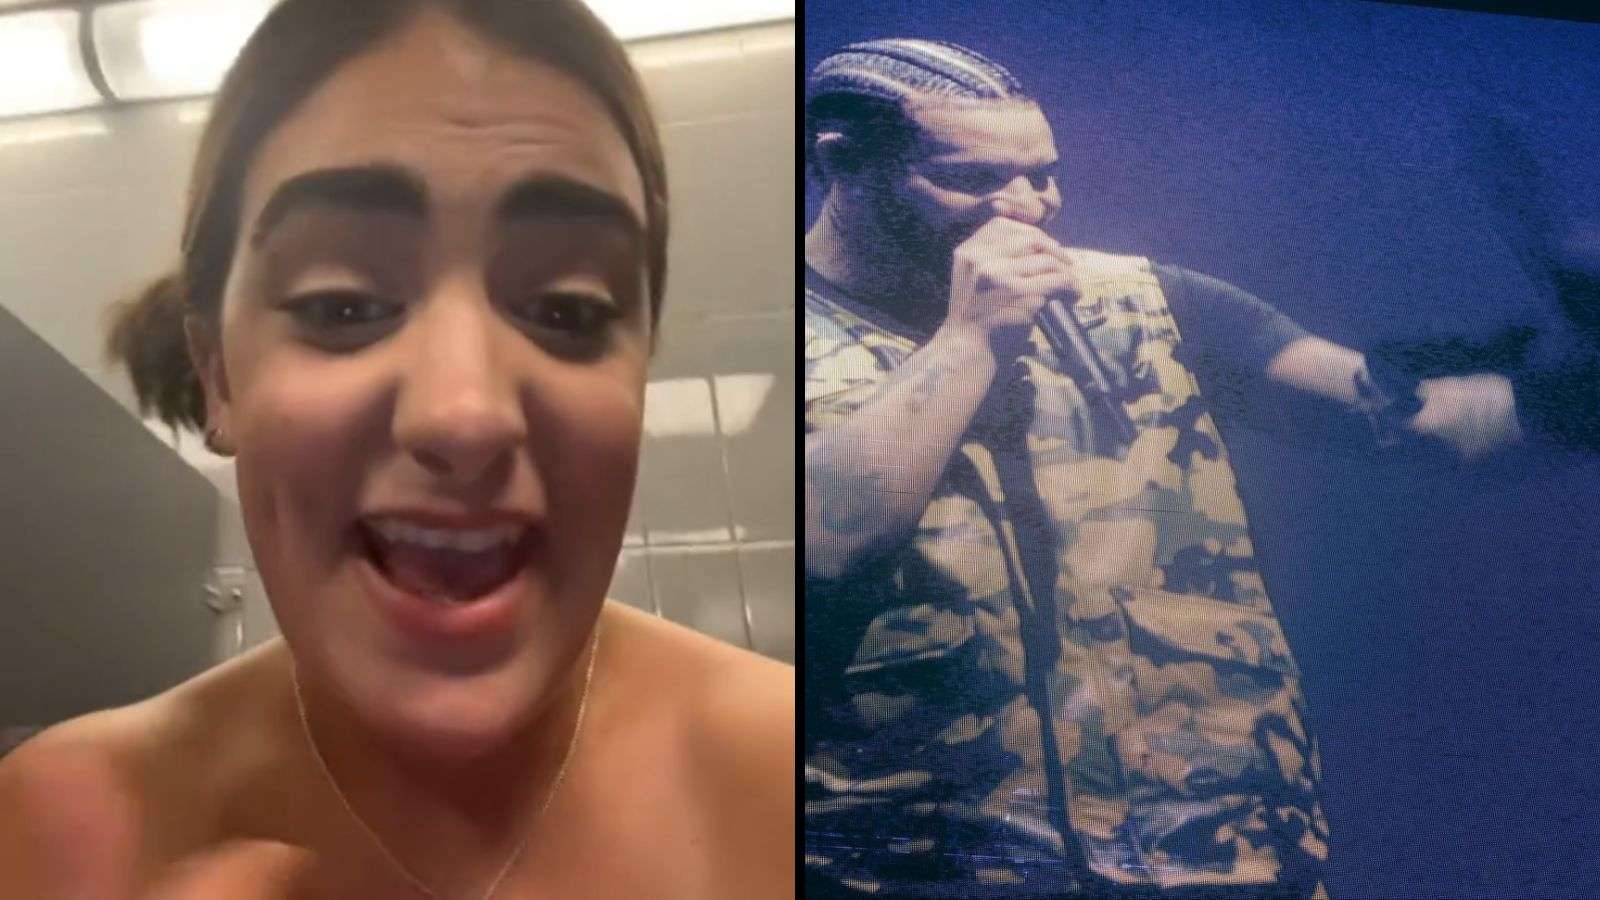 Drake fan who tossed 36G bra on stage will make content for